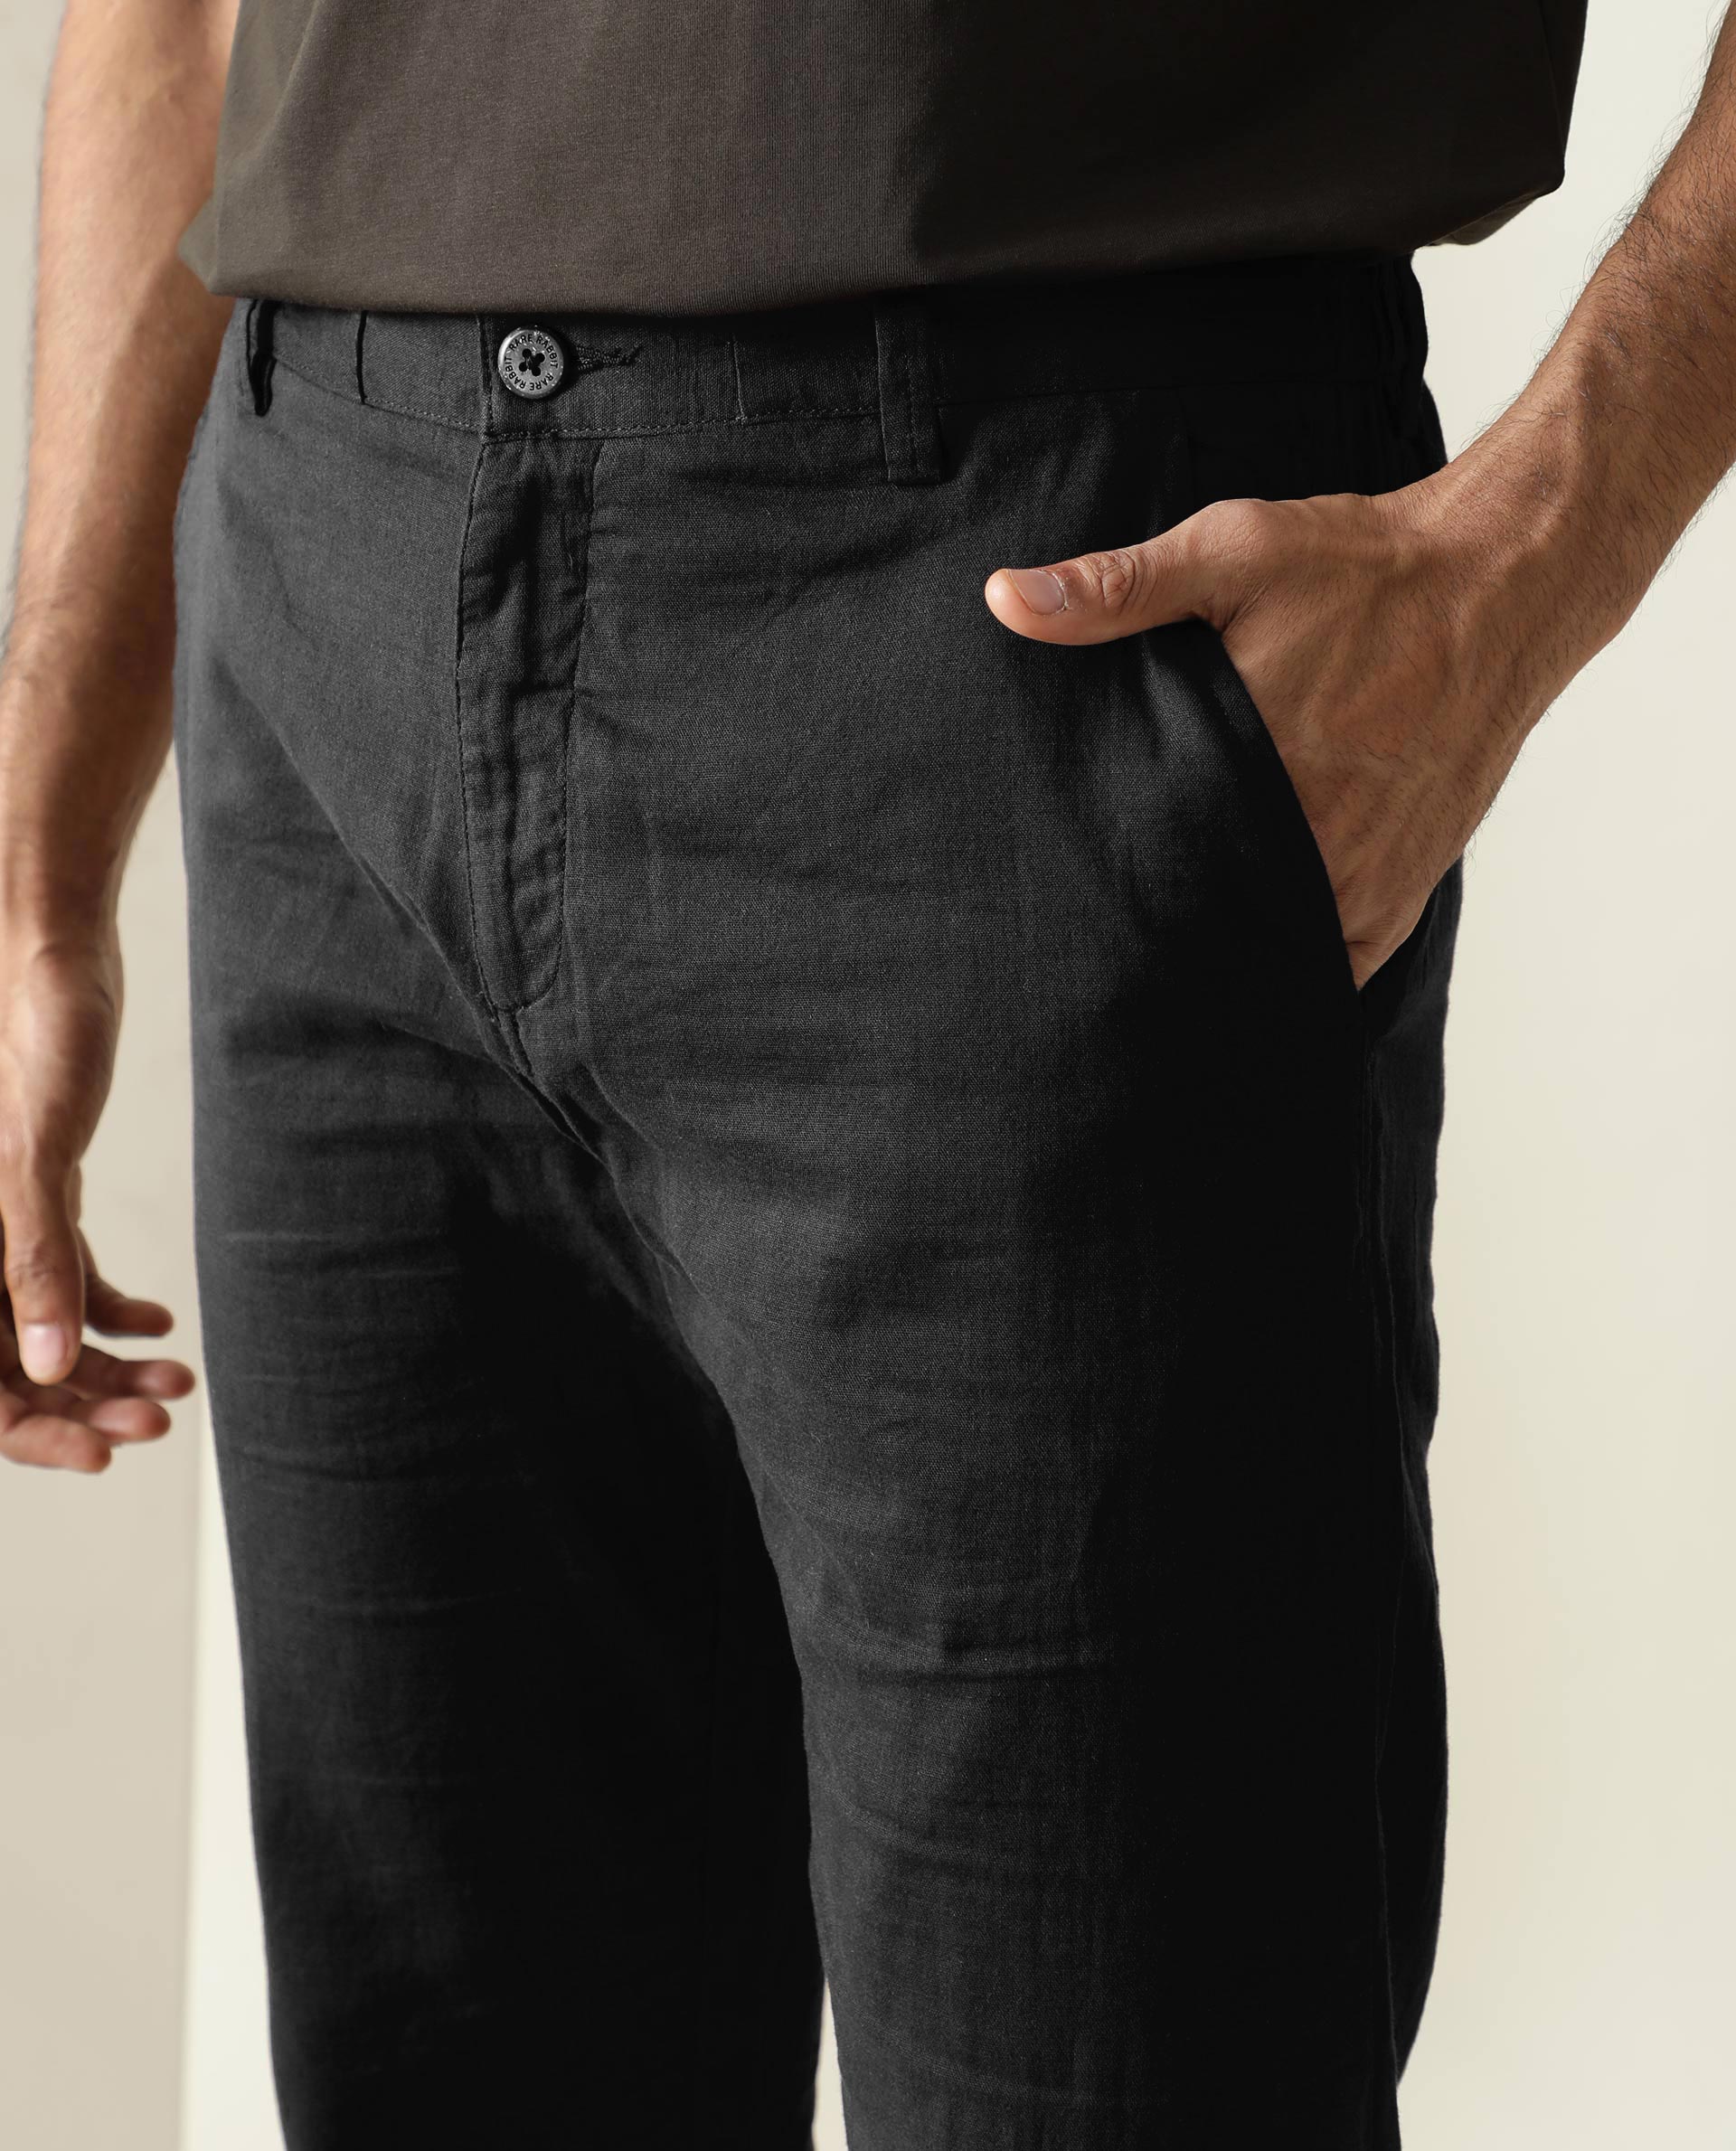 12 Modern Trouser Styles All Men Should Own by GentWith Blog